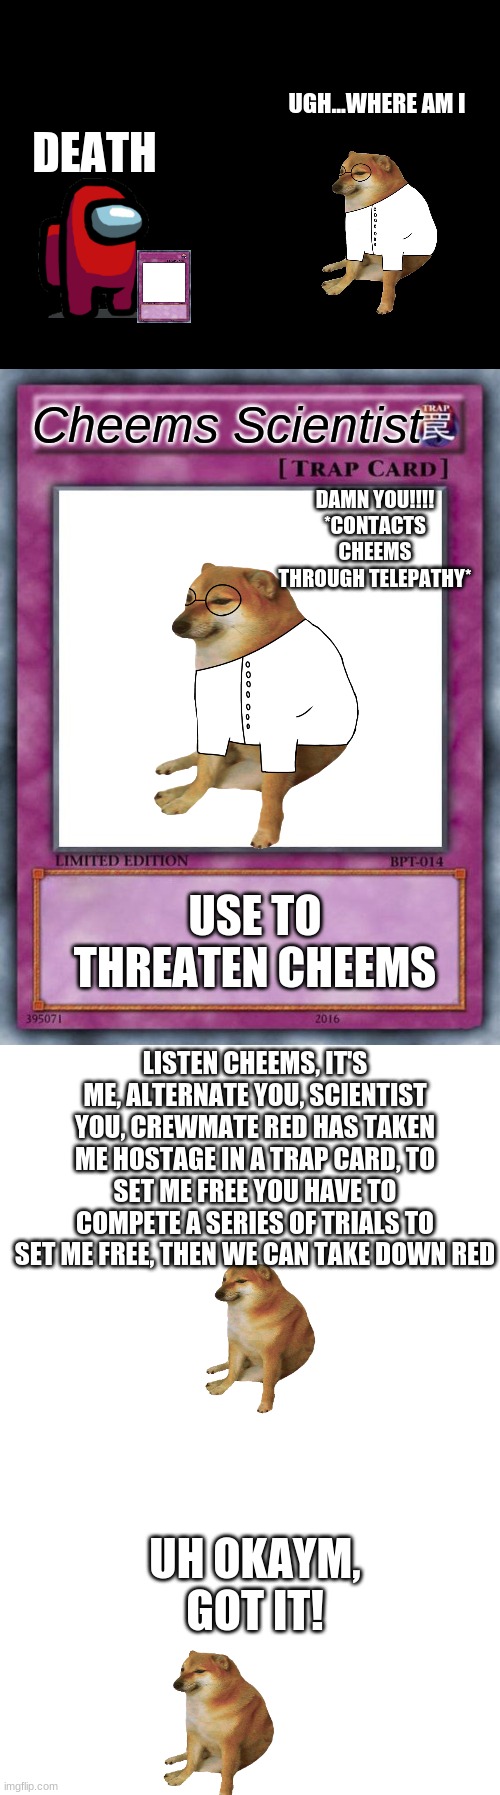 Cheems story s3 pt3 | UGH...WHERE AM I; DEATH; Cheems Scientist; DAMN YOU!!!! *CONTACTS CHEEMS THROUGH TELEPATHY*; USE TO THREATEN CHEEMS; LISTEN CHEEMS, IT'S ME, ALTERNATE YOU, SCIENTIST YOU, CREWMATE RED HAS TAKEN ME HOSTAGE IN A TRAP CARD, TO SET ME FREE YOU HAVE TO COMPETE A SERIES OF TRIALS TO SET ME FREE, THEN WE CAN TAKE DOWN RED; UH OKAYM, GOT IT! | image tagged in blank black,trap card,blank white template | made w/ Imgflip meme maker